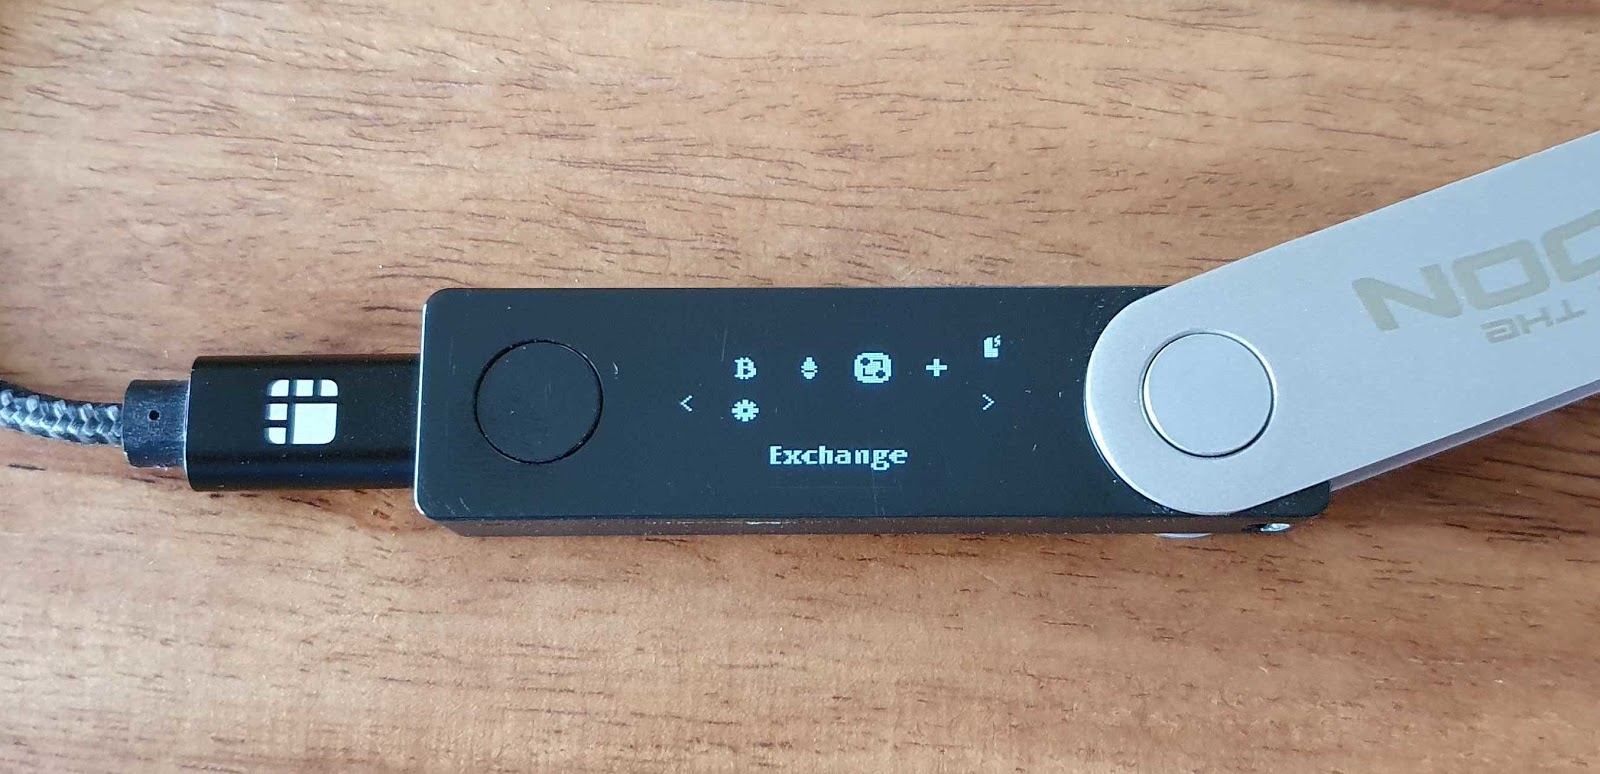 Swap with your Ledger hardware wallet 